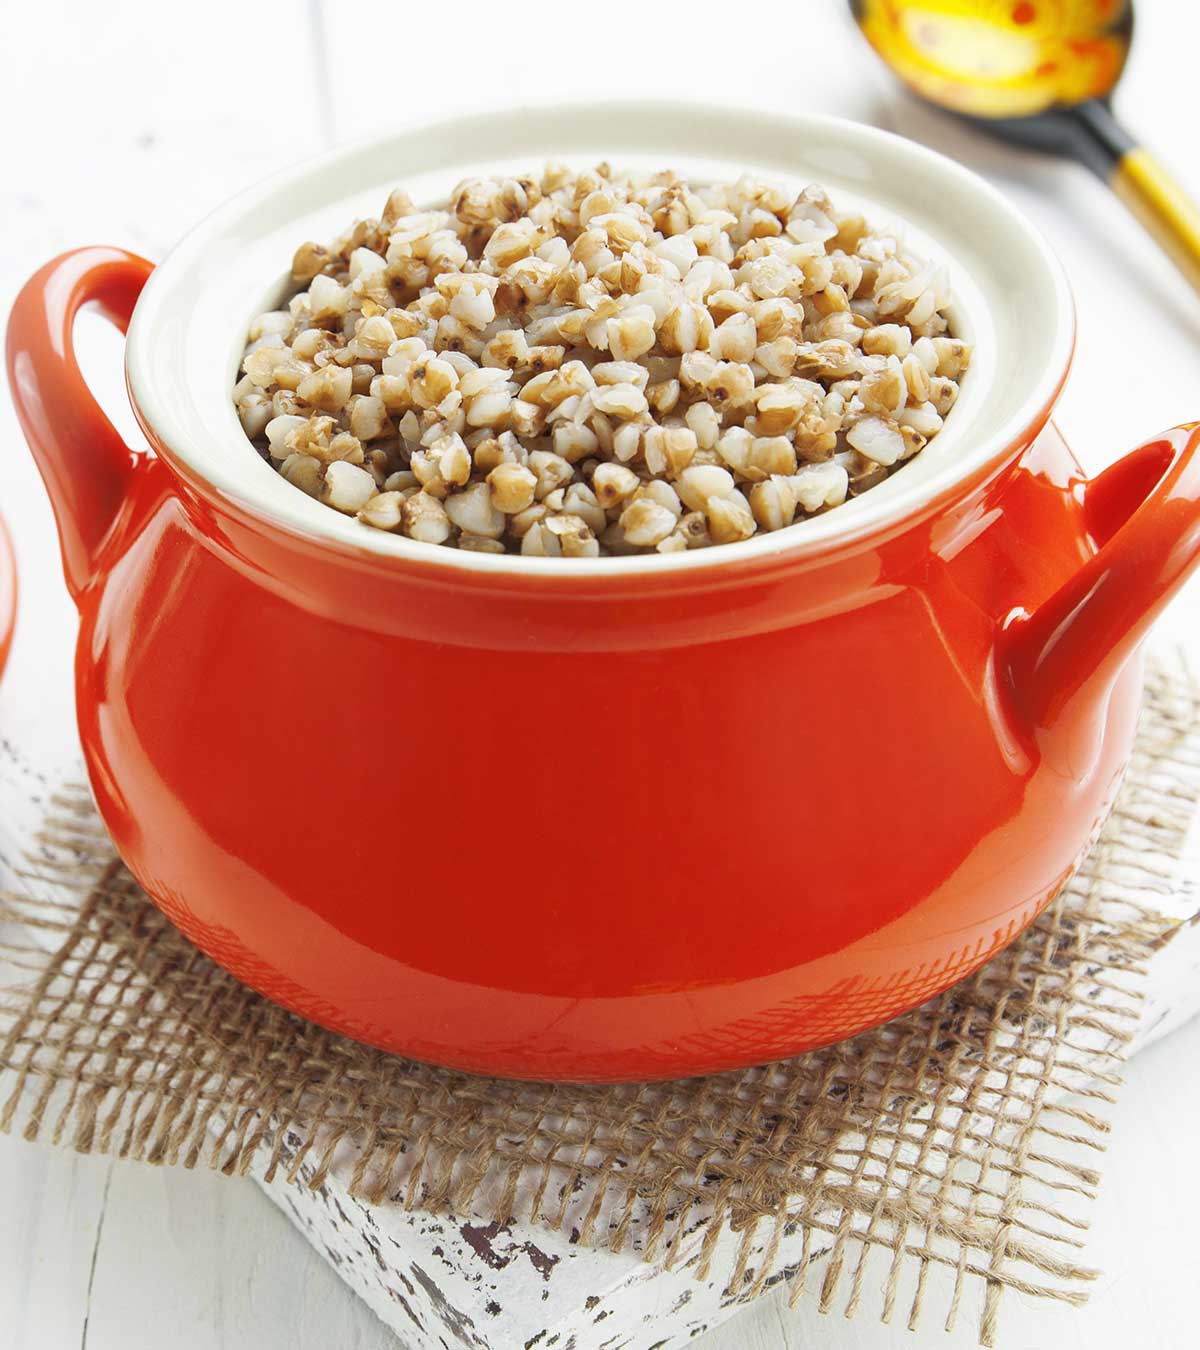 Buckwheat For Babies: Health Benefits, Precautions, And Recipes